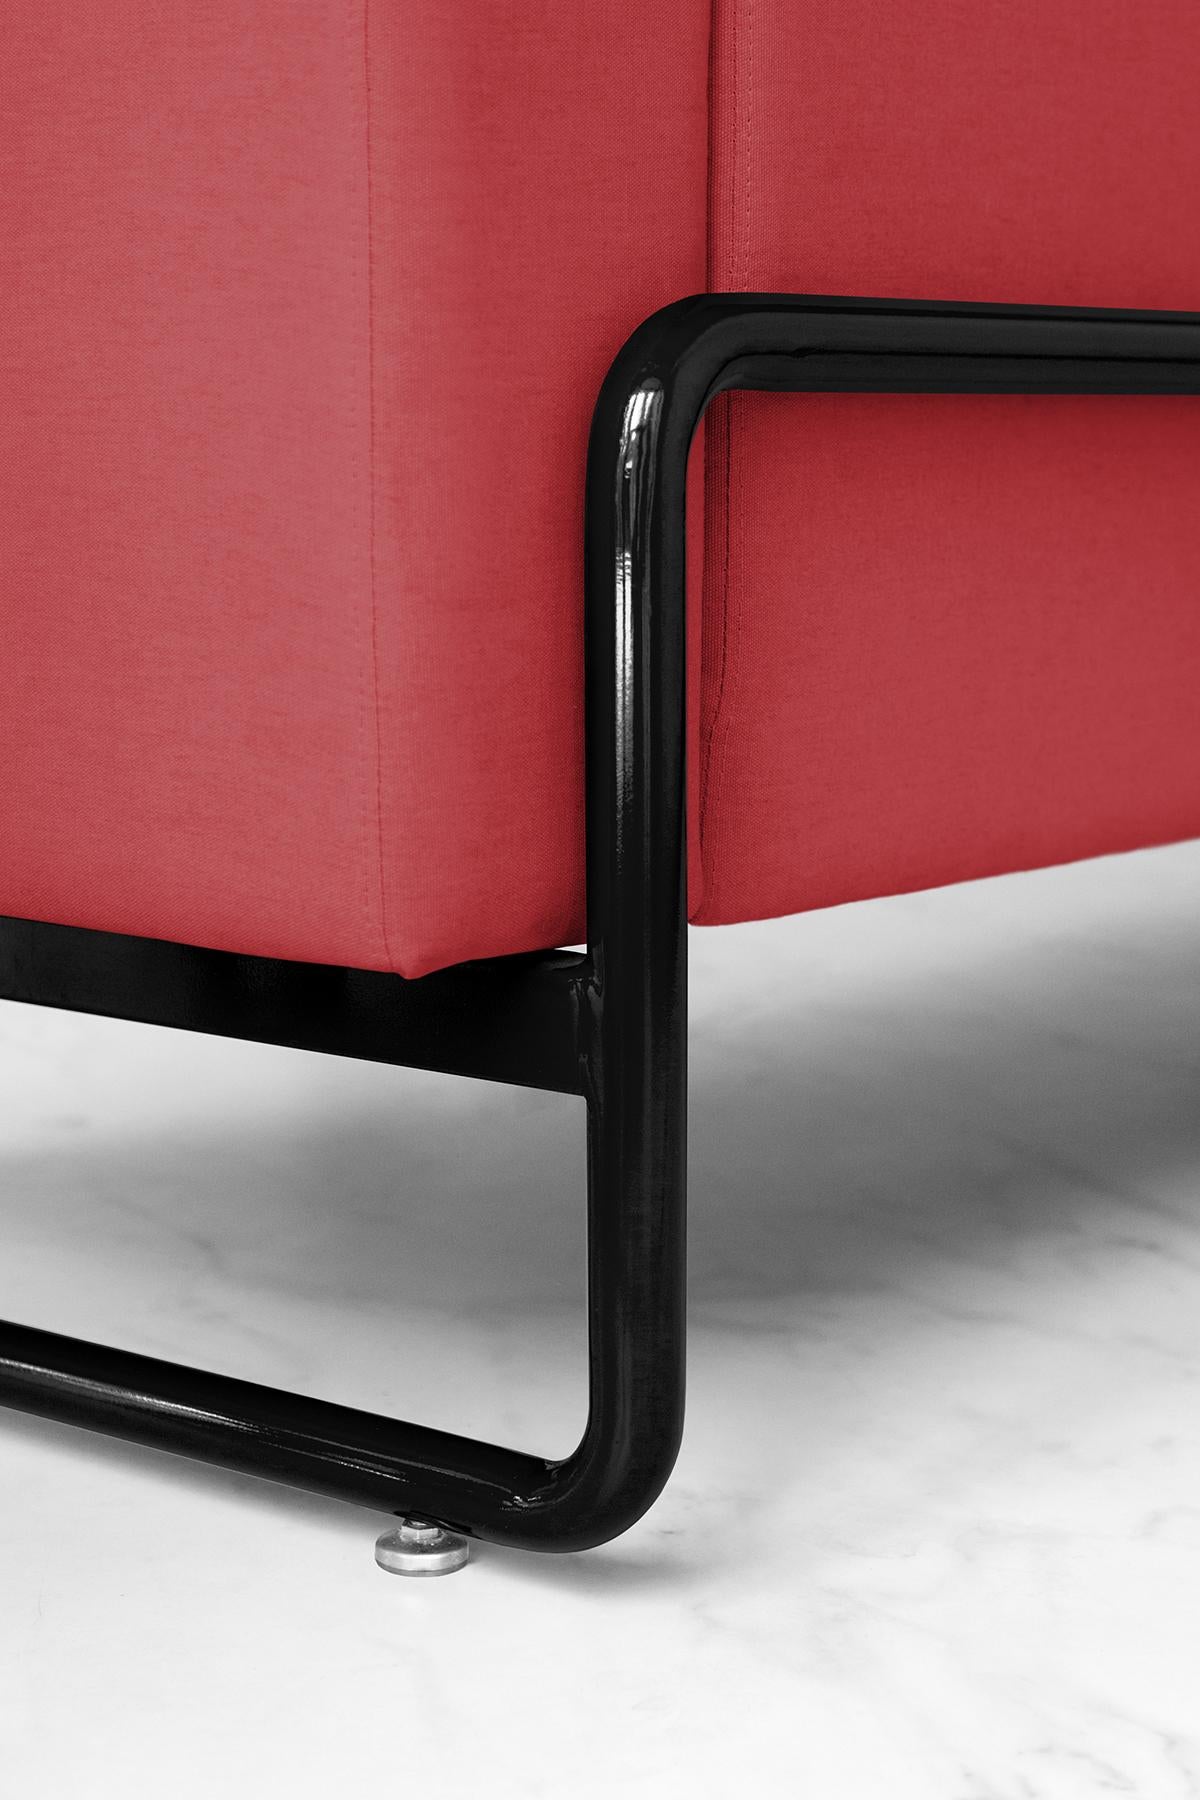 Red PK8 Armchair, Seat & Lamp Hybrid, Handmade Metal Structure by Paulo Kobylka For Sale 10